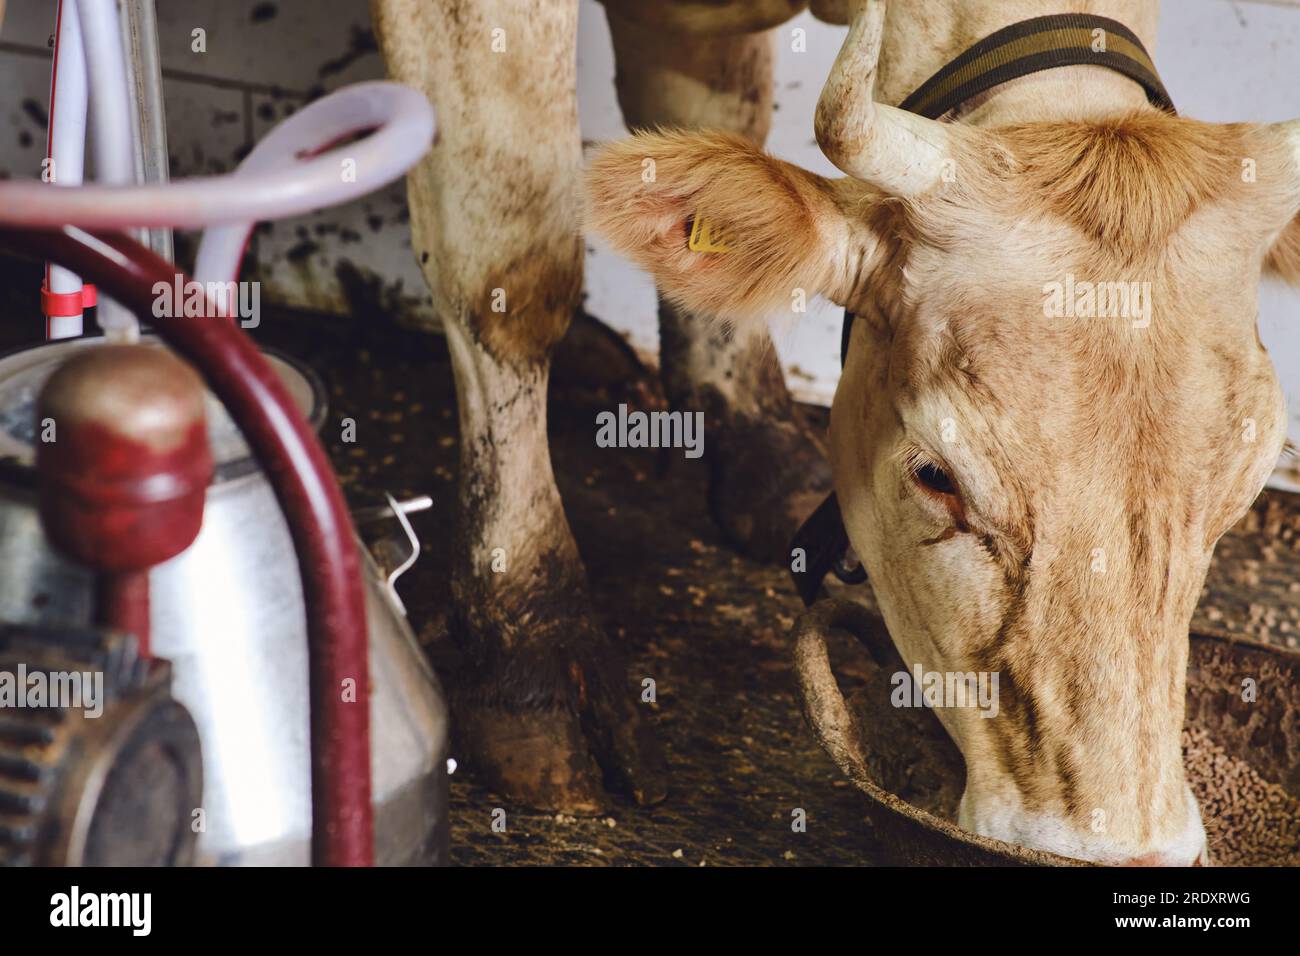 The dairy industry relies on the cow milking process, but without proper sanitation, it can lead to disease and infection in the bovine animals. Stock Photo